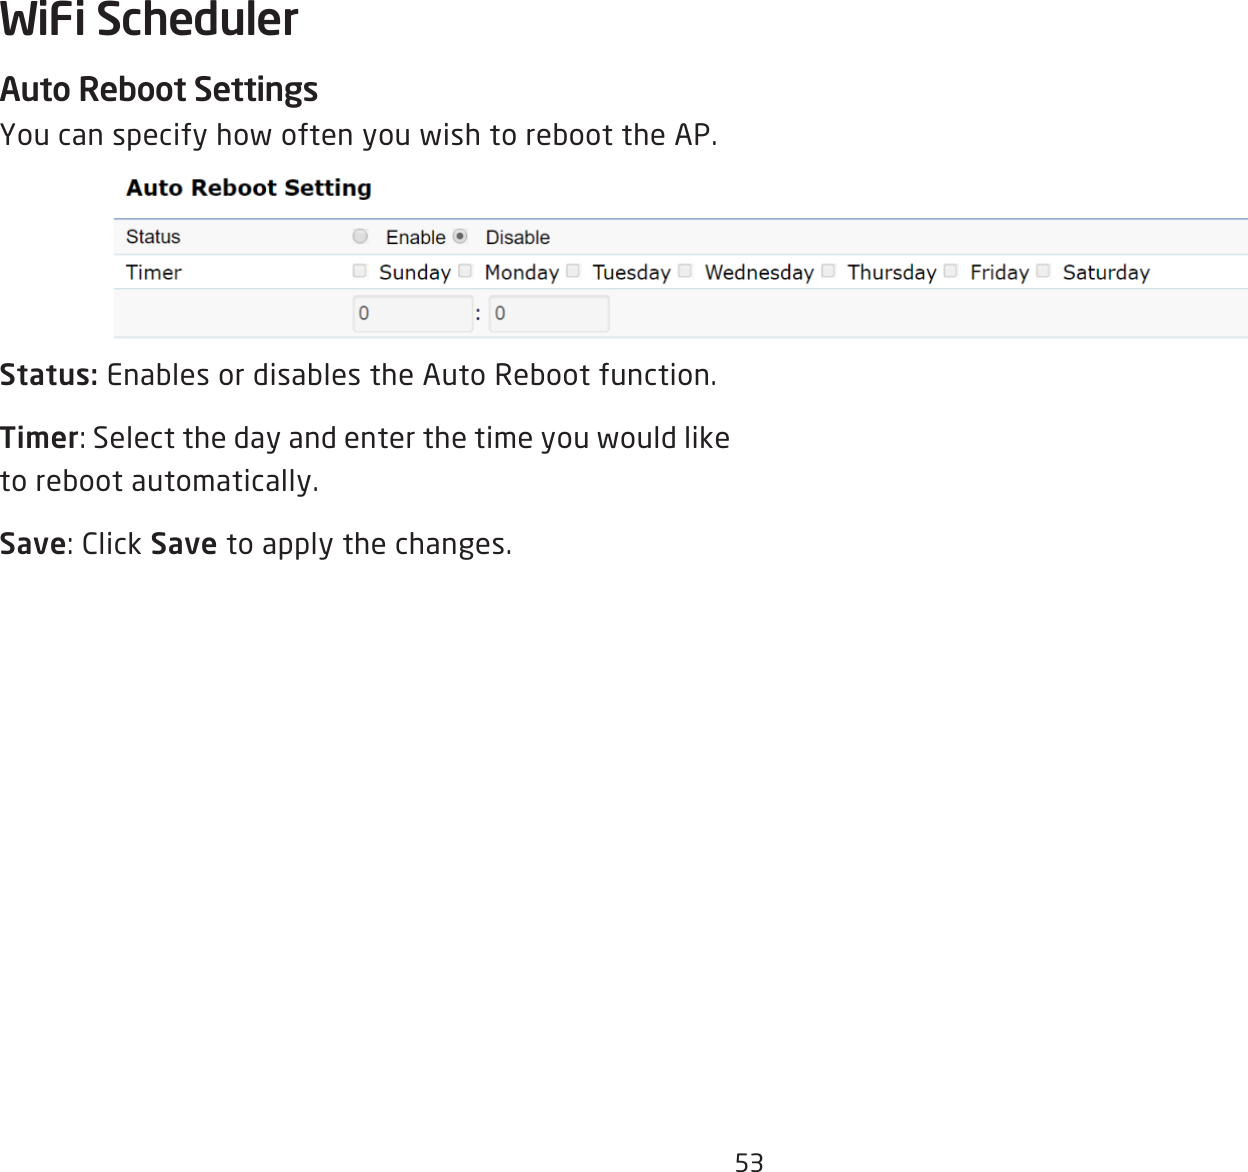 53Auto Reboot Settings You can specify how often you wish to reboot the AP.   Status: Enables or disables the Auto Reboot function.Timer: Select the day and enter the time you would like to reboot automatically.Save: Click Save to apply the changes.WiFi Scheduler